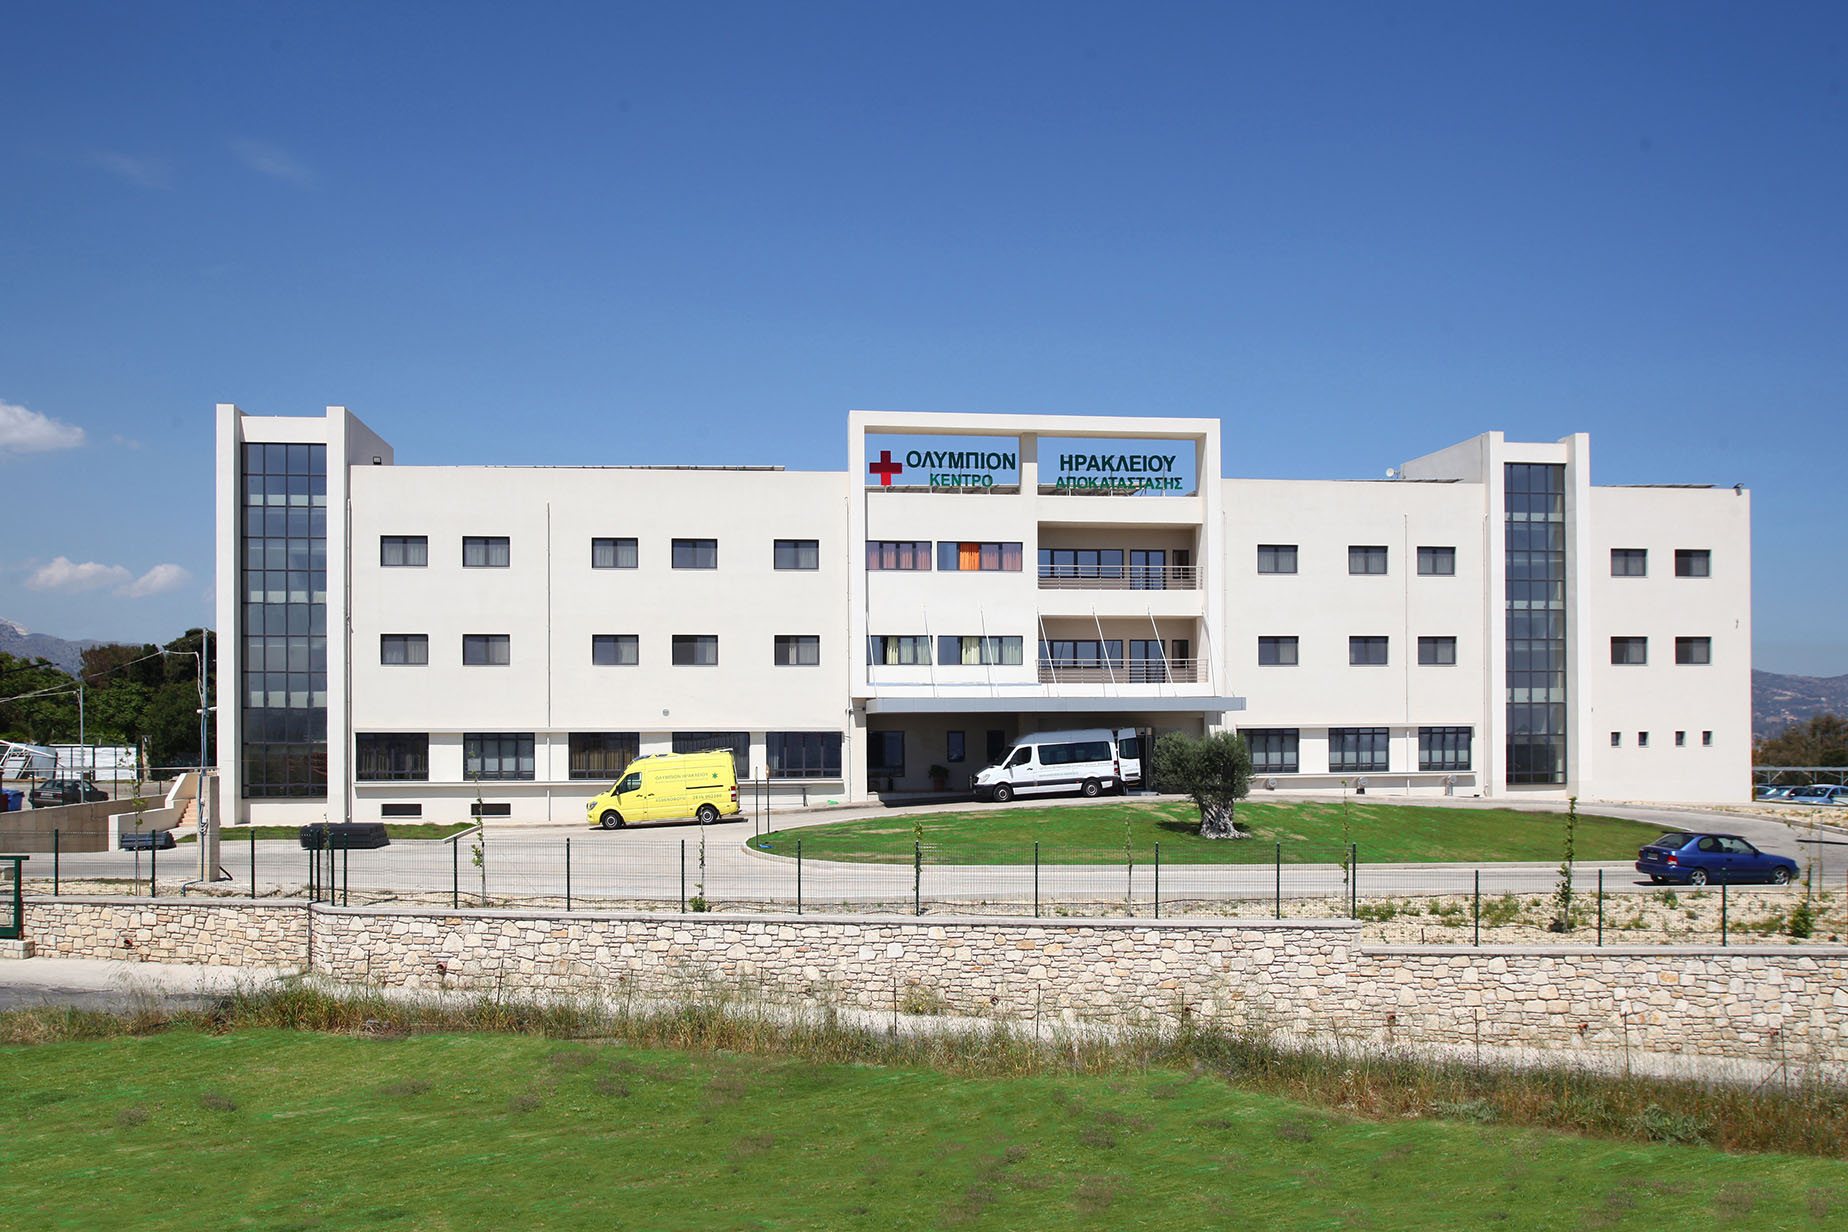 The state-of-the-art OLYMPION Rehabilitation and Recovery Center of Heraklion